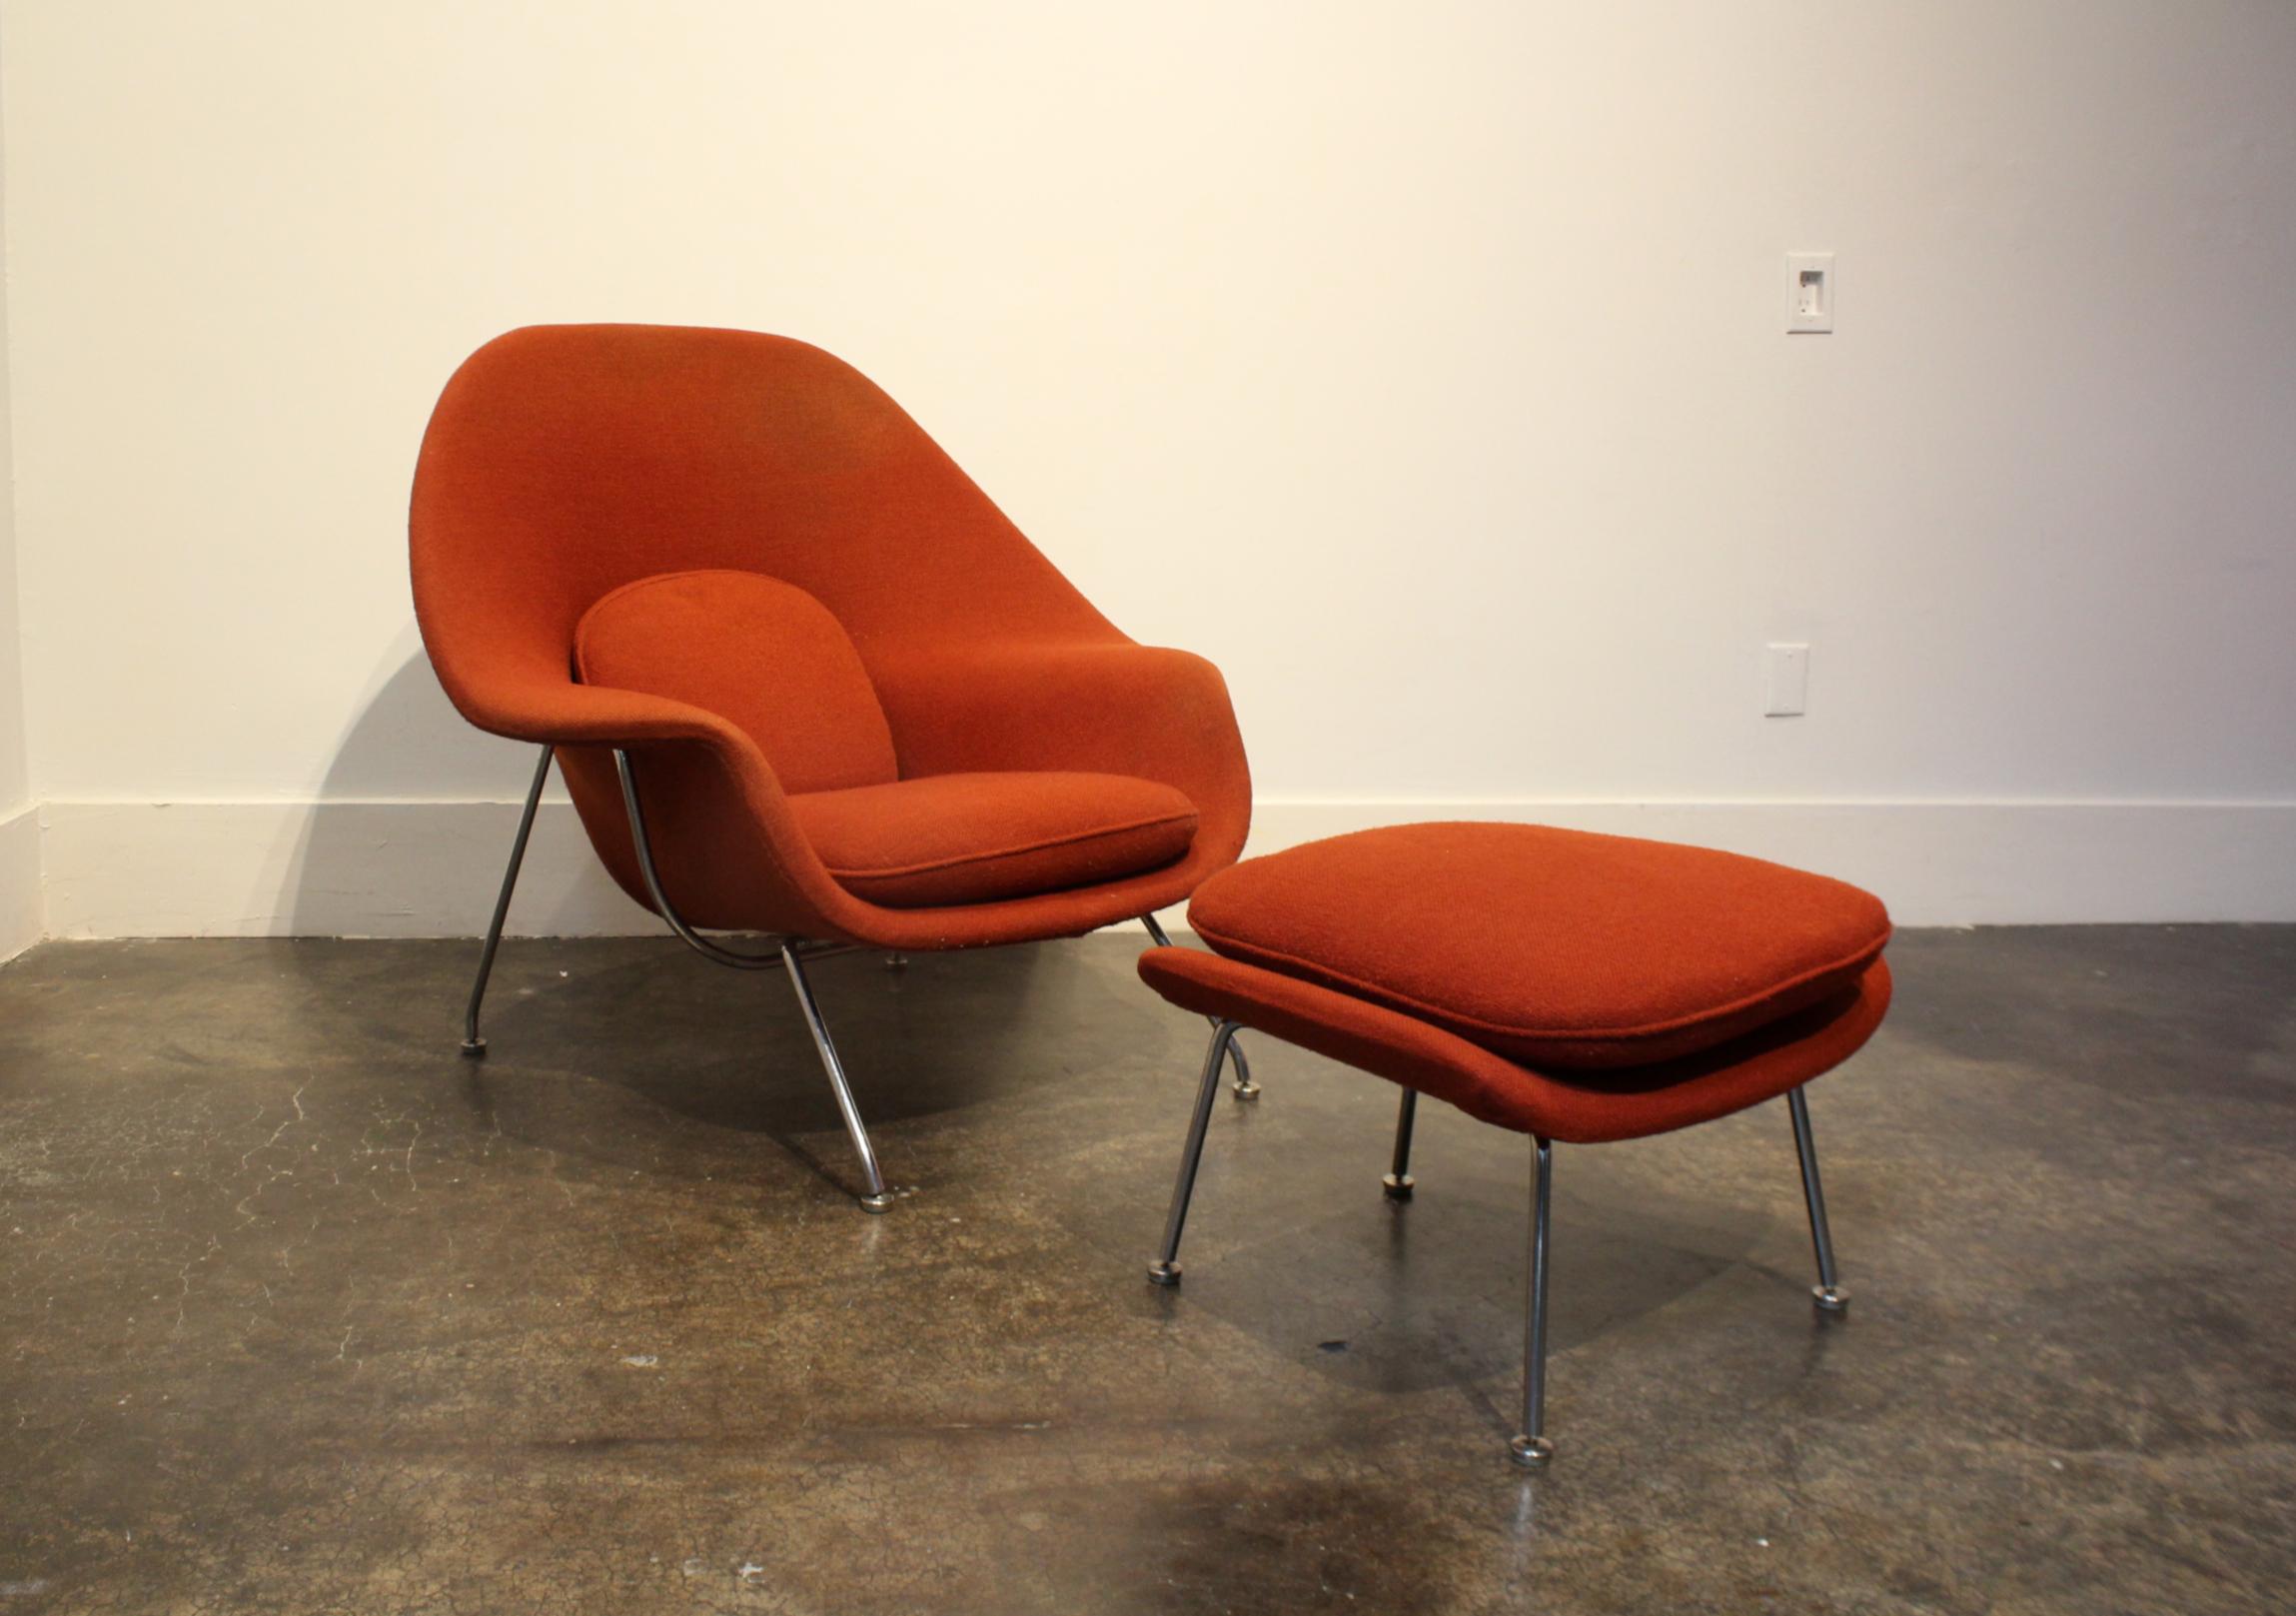 Vintage Knoll Eero Saarinen womb chair and ottoman. Labels date it to the 1960s. Beautiful original upholstery in rust orange/red. Signs of wear consistent with age and use.

Dimensions: 

Chair 37.5